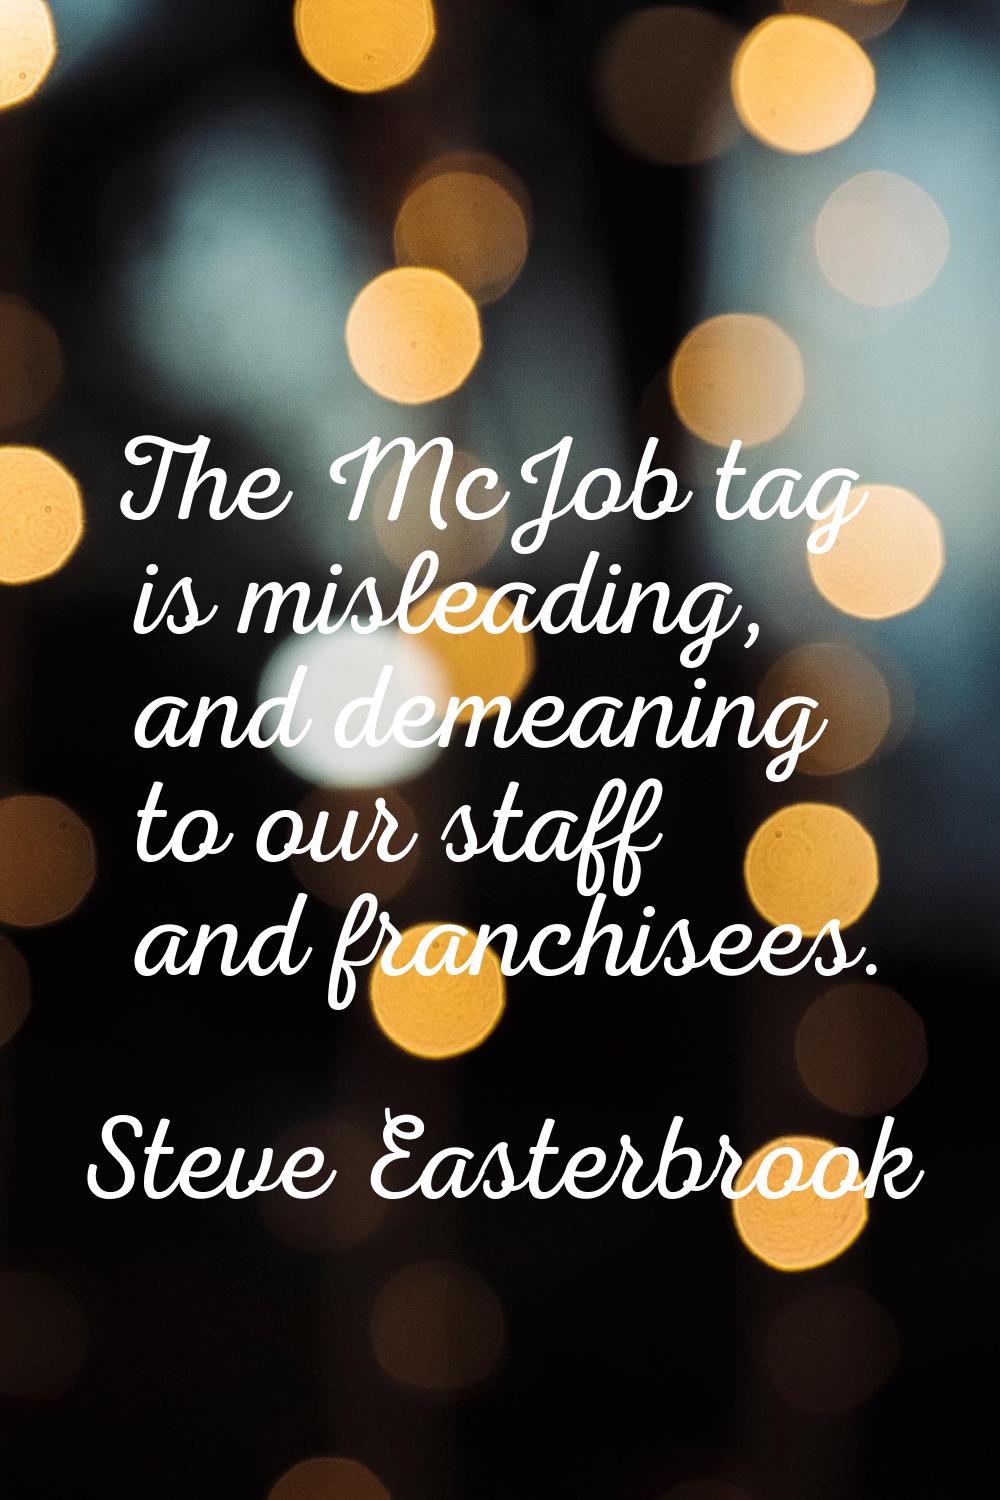 The McJob tag is misleading, and demeaning to our staff and franchisees.